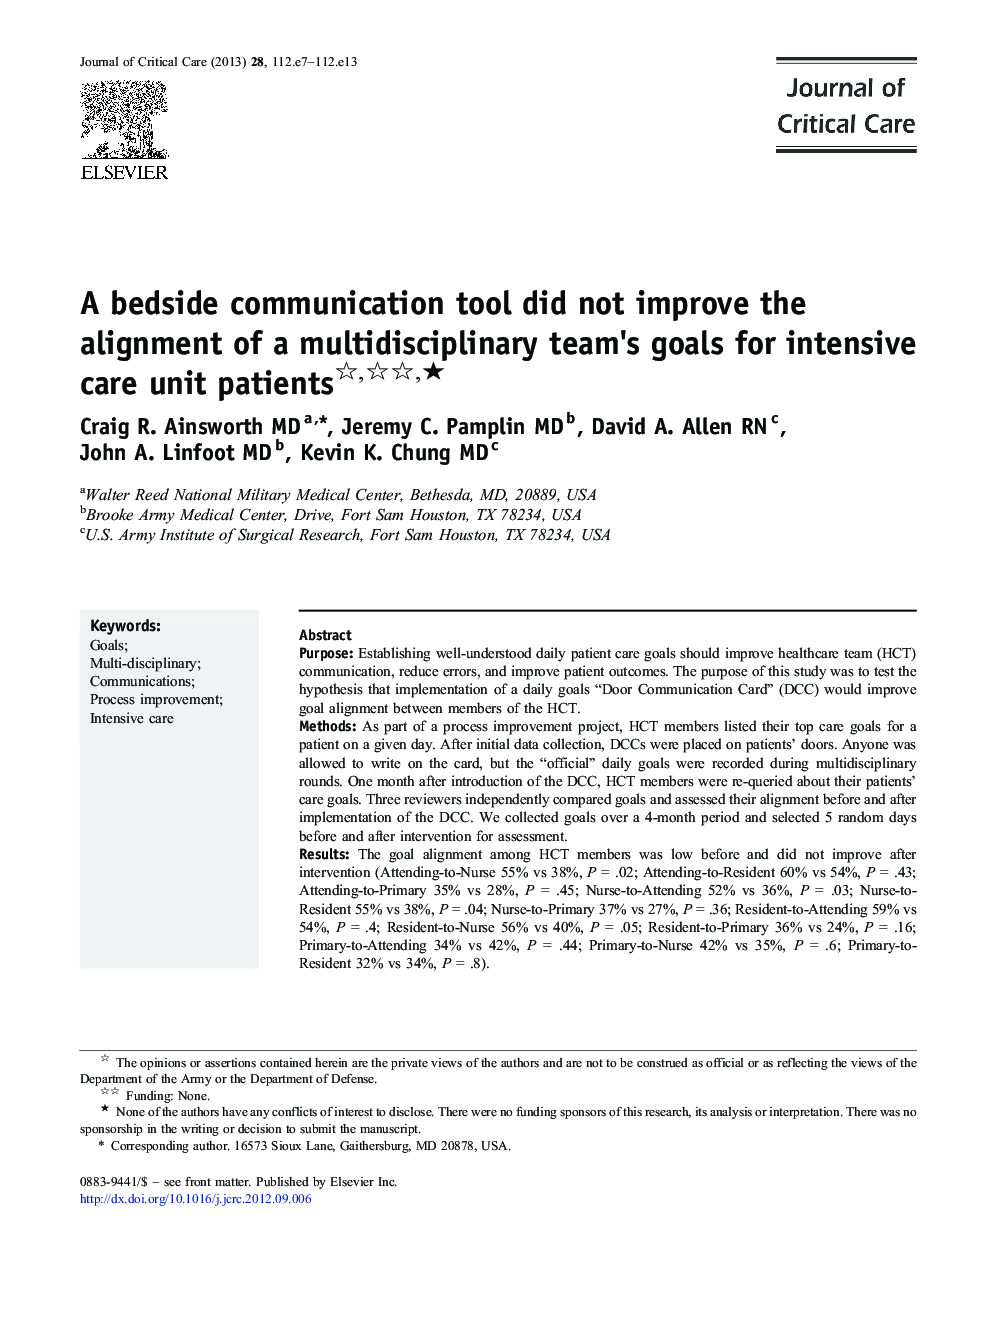 A bedside communication tool did not improve the alignment of a multidisciplinary team's goals for intensive care unit patientsâ